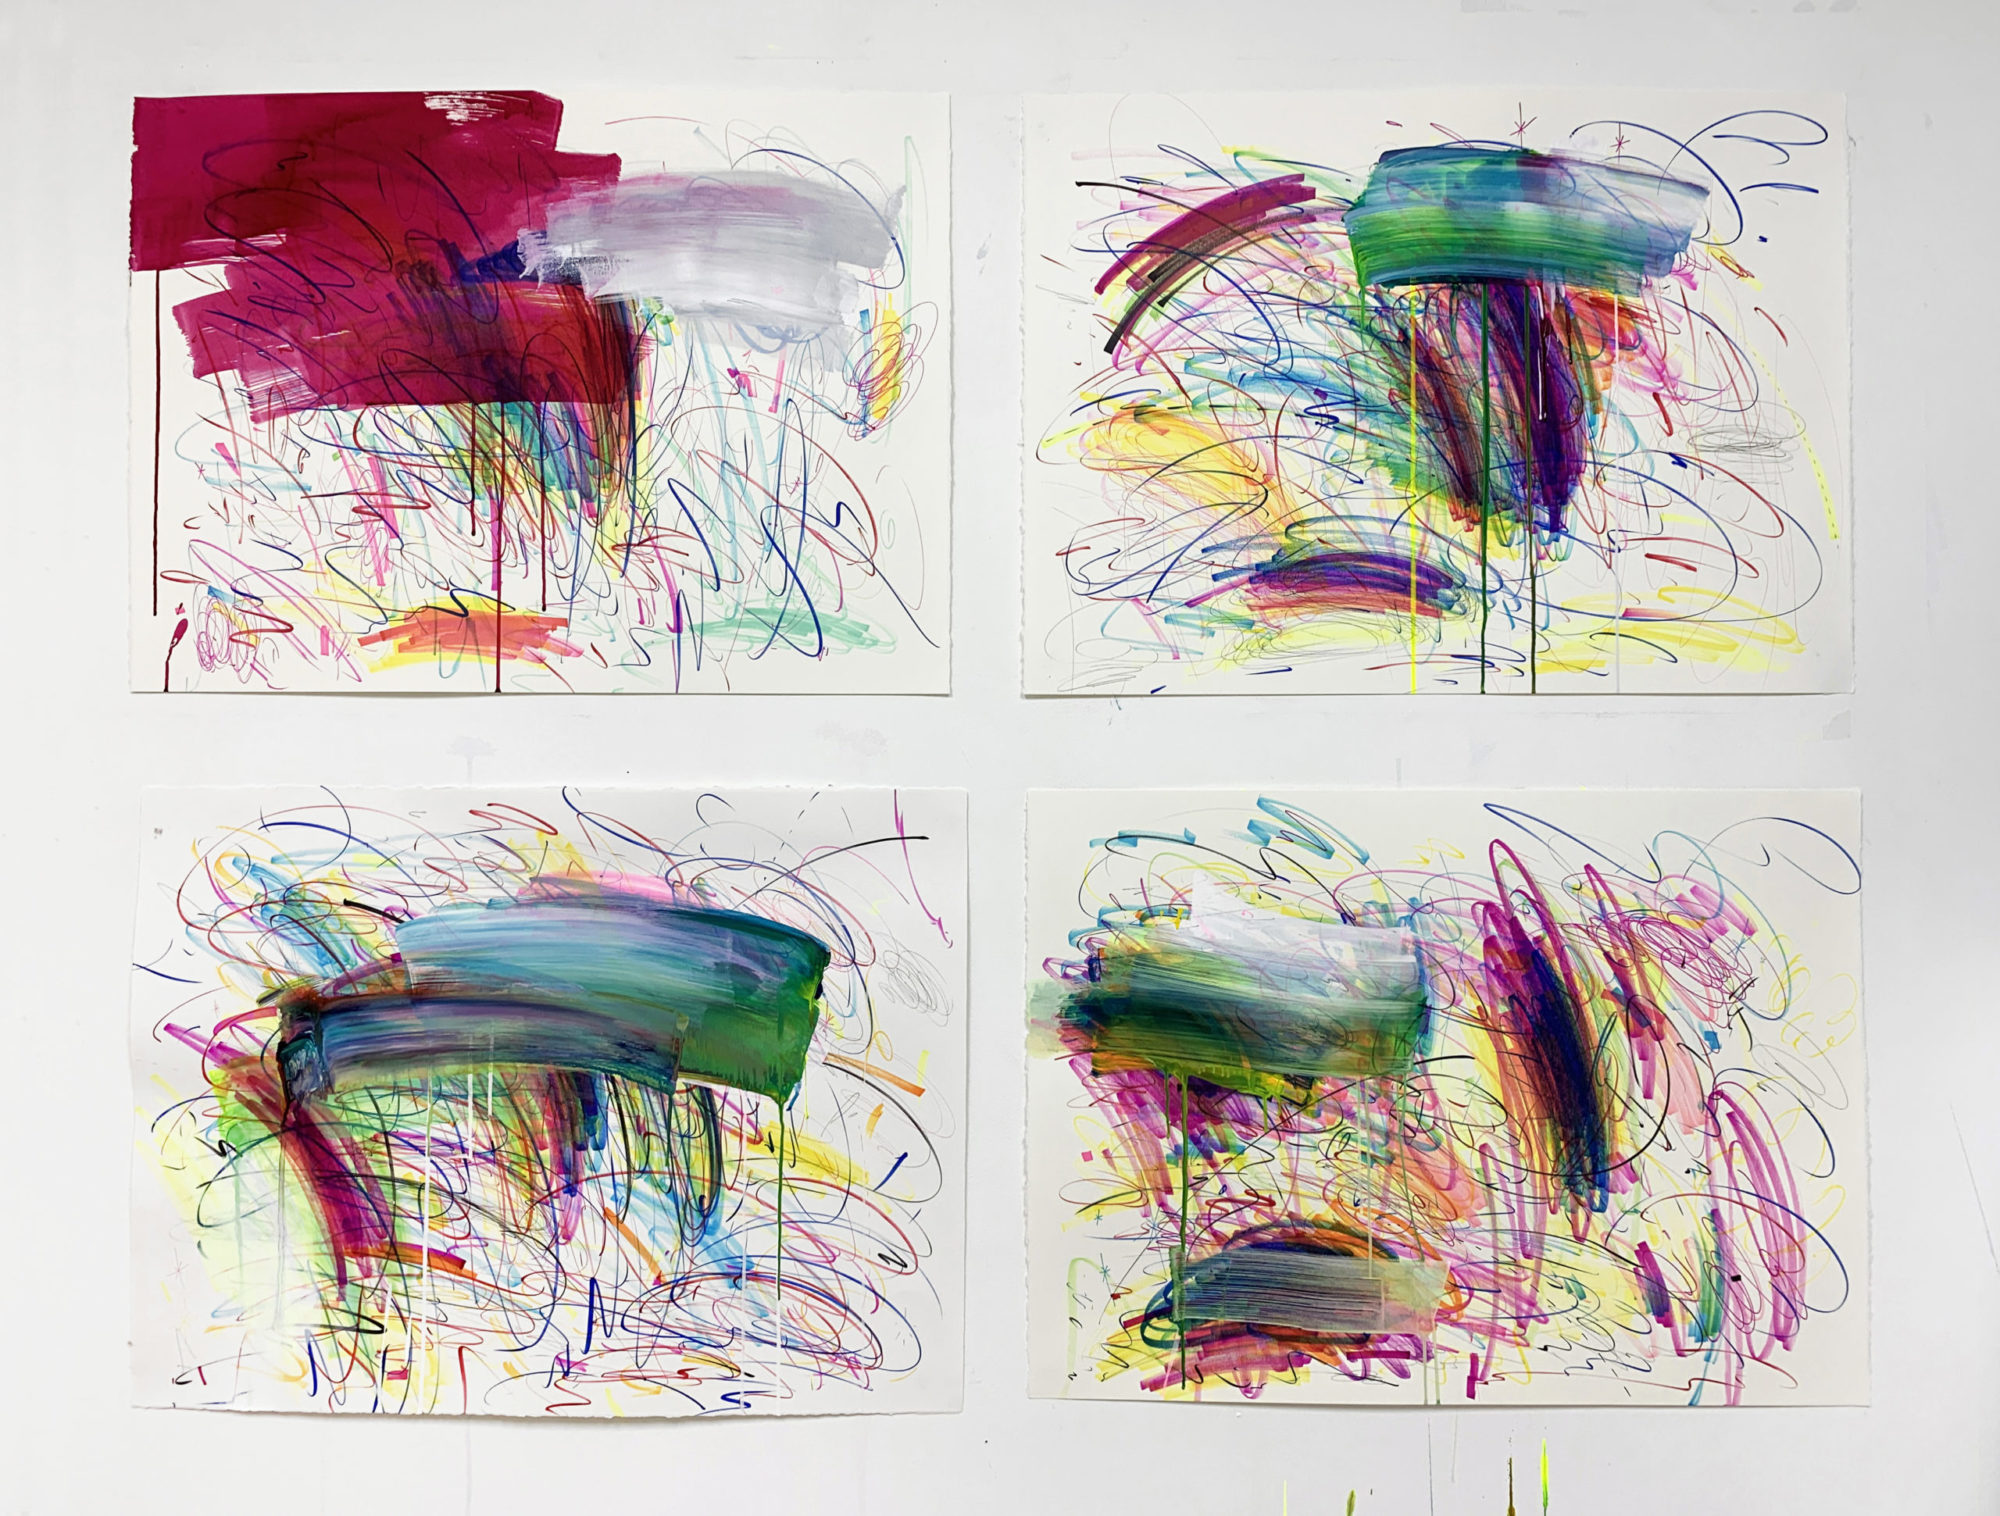 4 images of mixed media on paper by Ryan Coleman